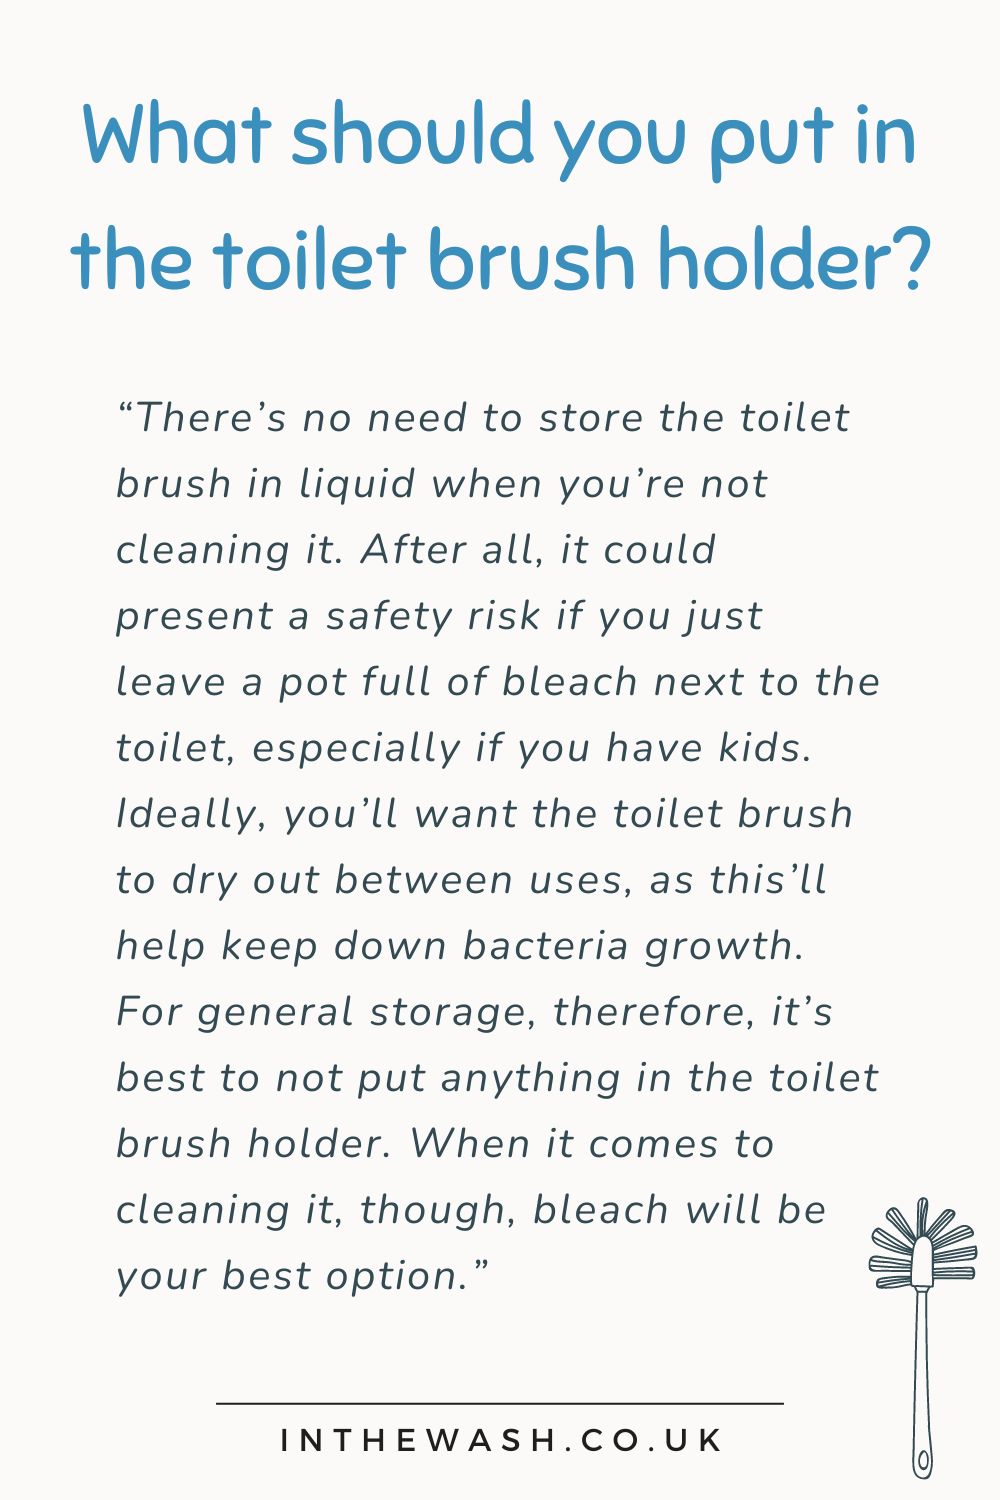 What should you put in the toilet brush holder?